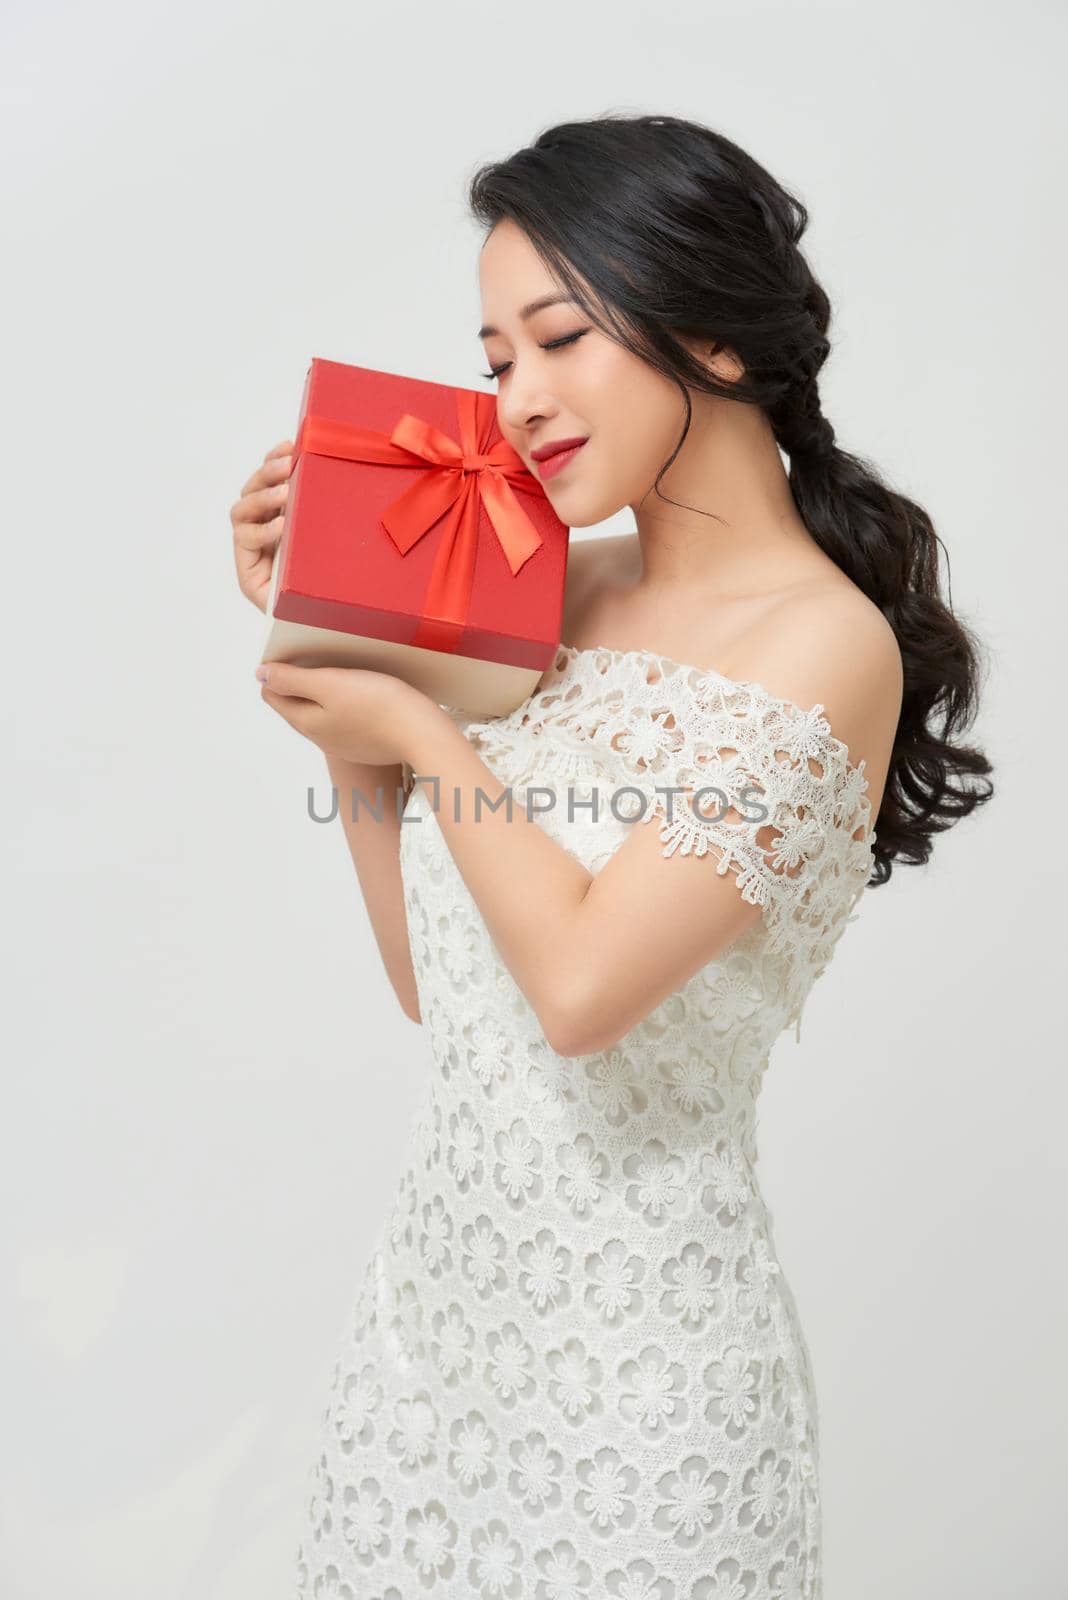 holidays, presents, wedding and happiness concept - smiling woman in white dress holding red gift box  by makidotvn